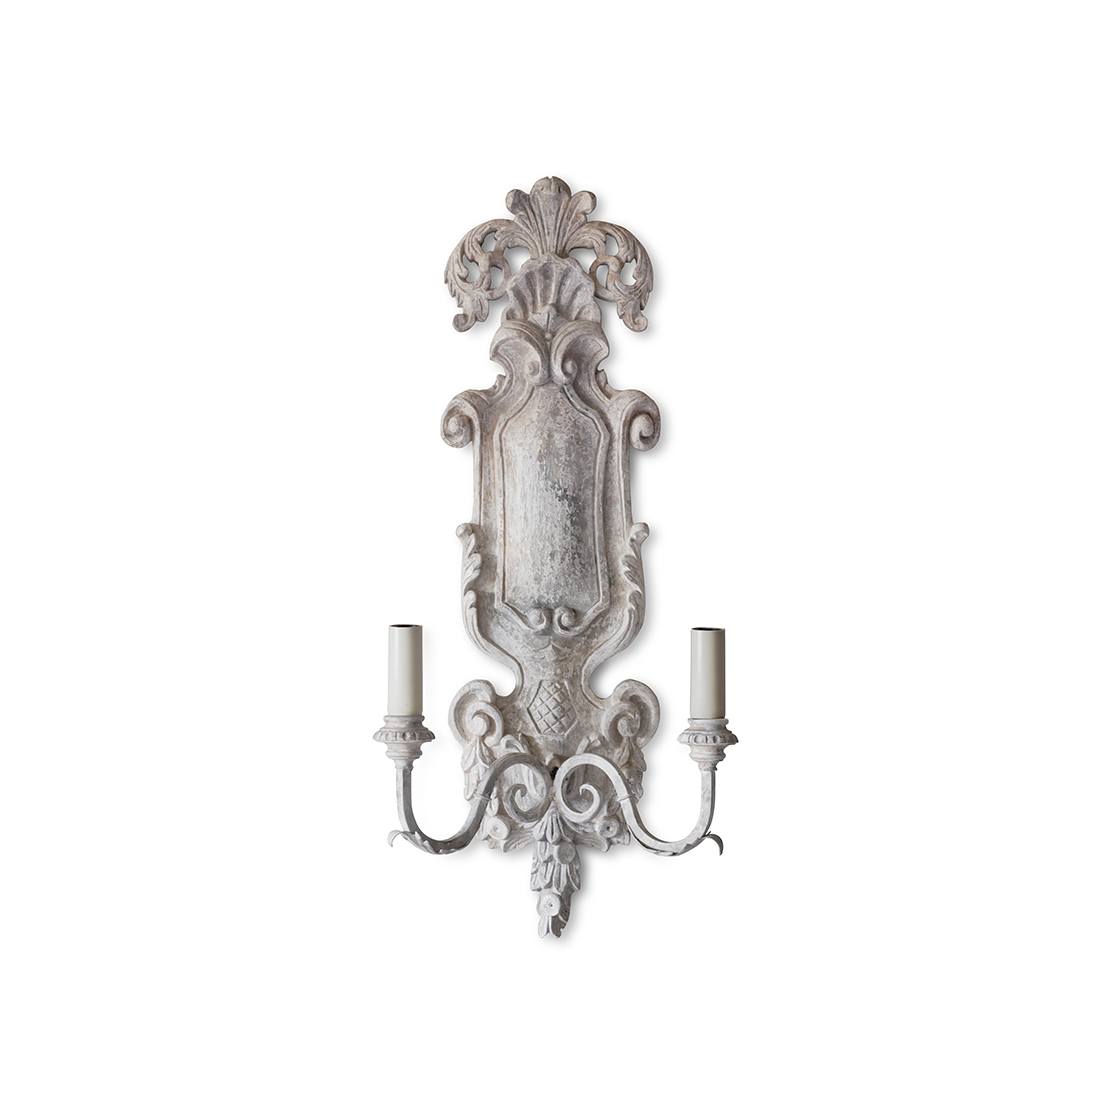 Rococo wall light in Antiqued ivory - Beaumont & Fletcher